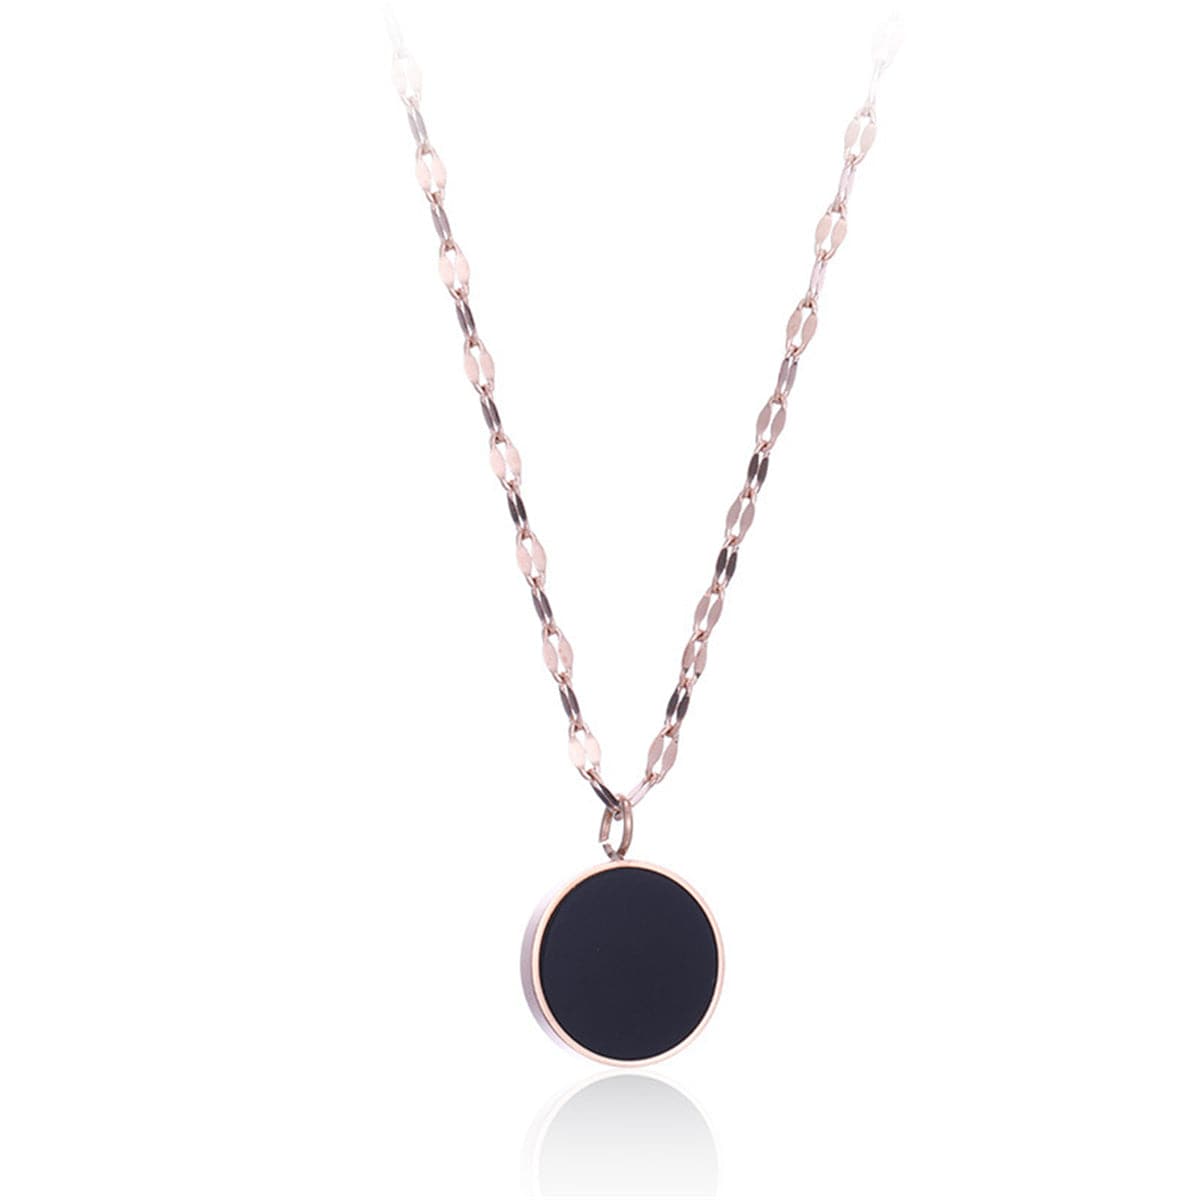 Black Shell & 18k Rose Gold-Plated Round Pendant Necklace - streetregion